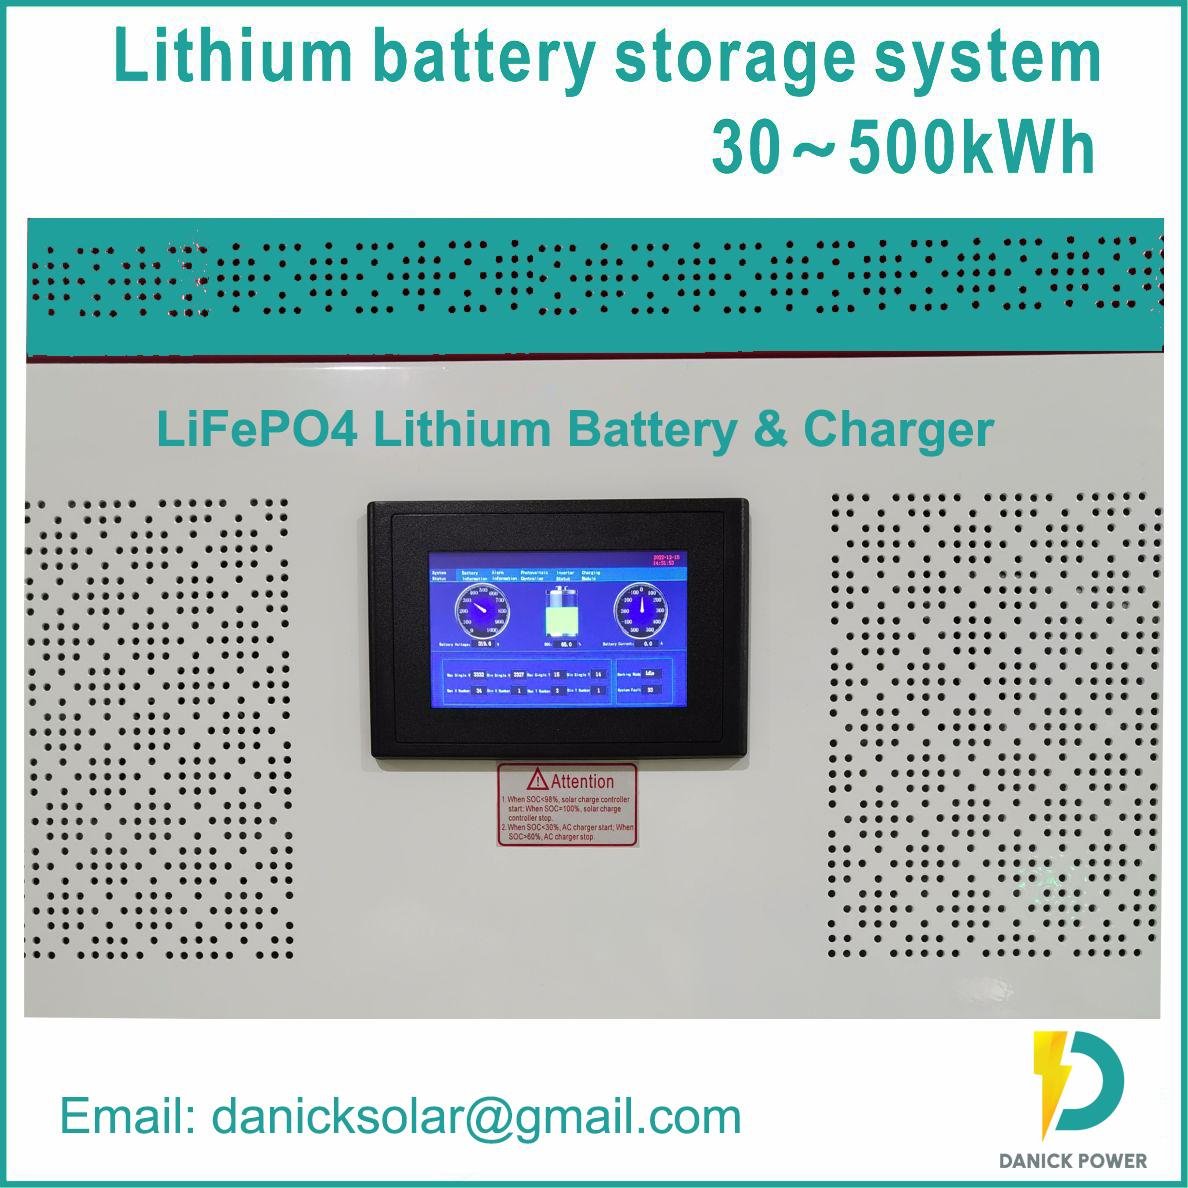 Efficient LiFePO4 Lithium Ion Battery Energy Storage System for Electric Transpo 4